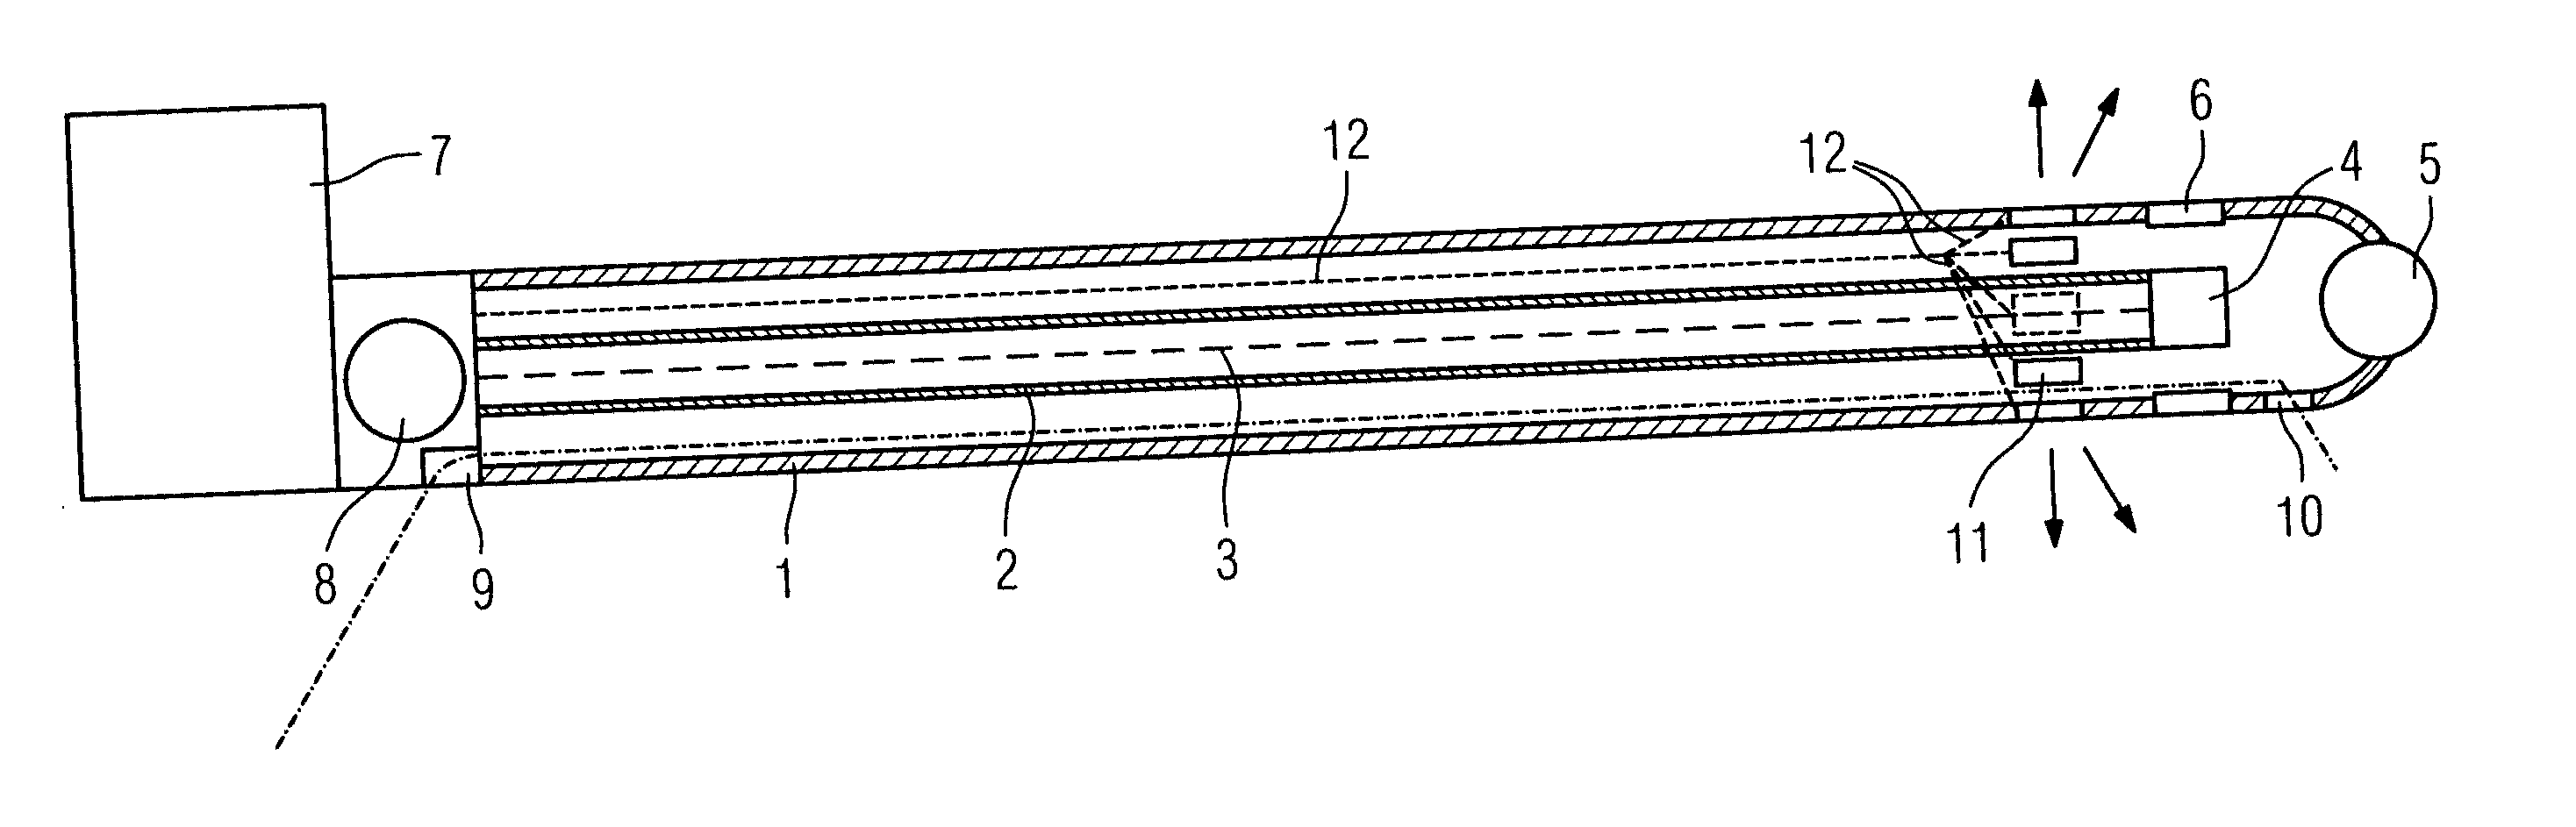 Device for performing laser angioplasty with OCT monitoring